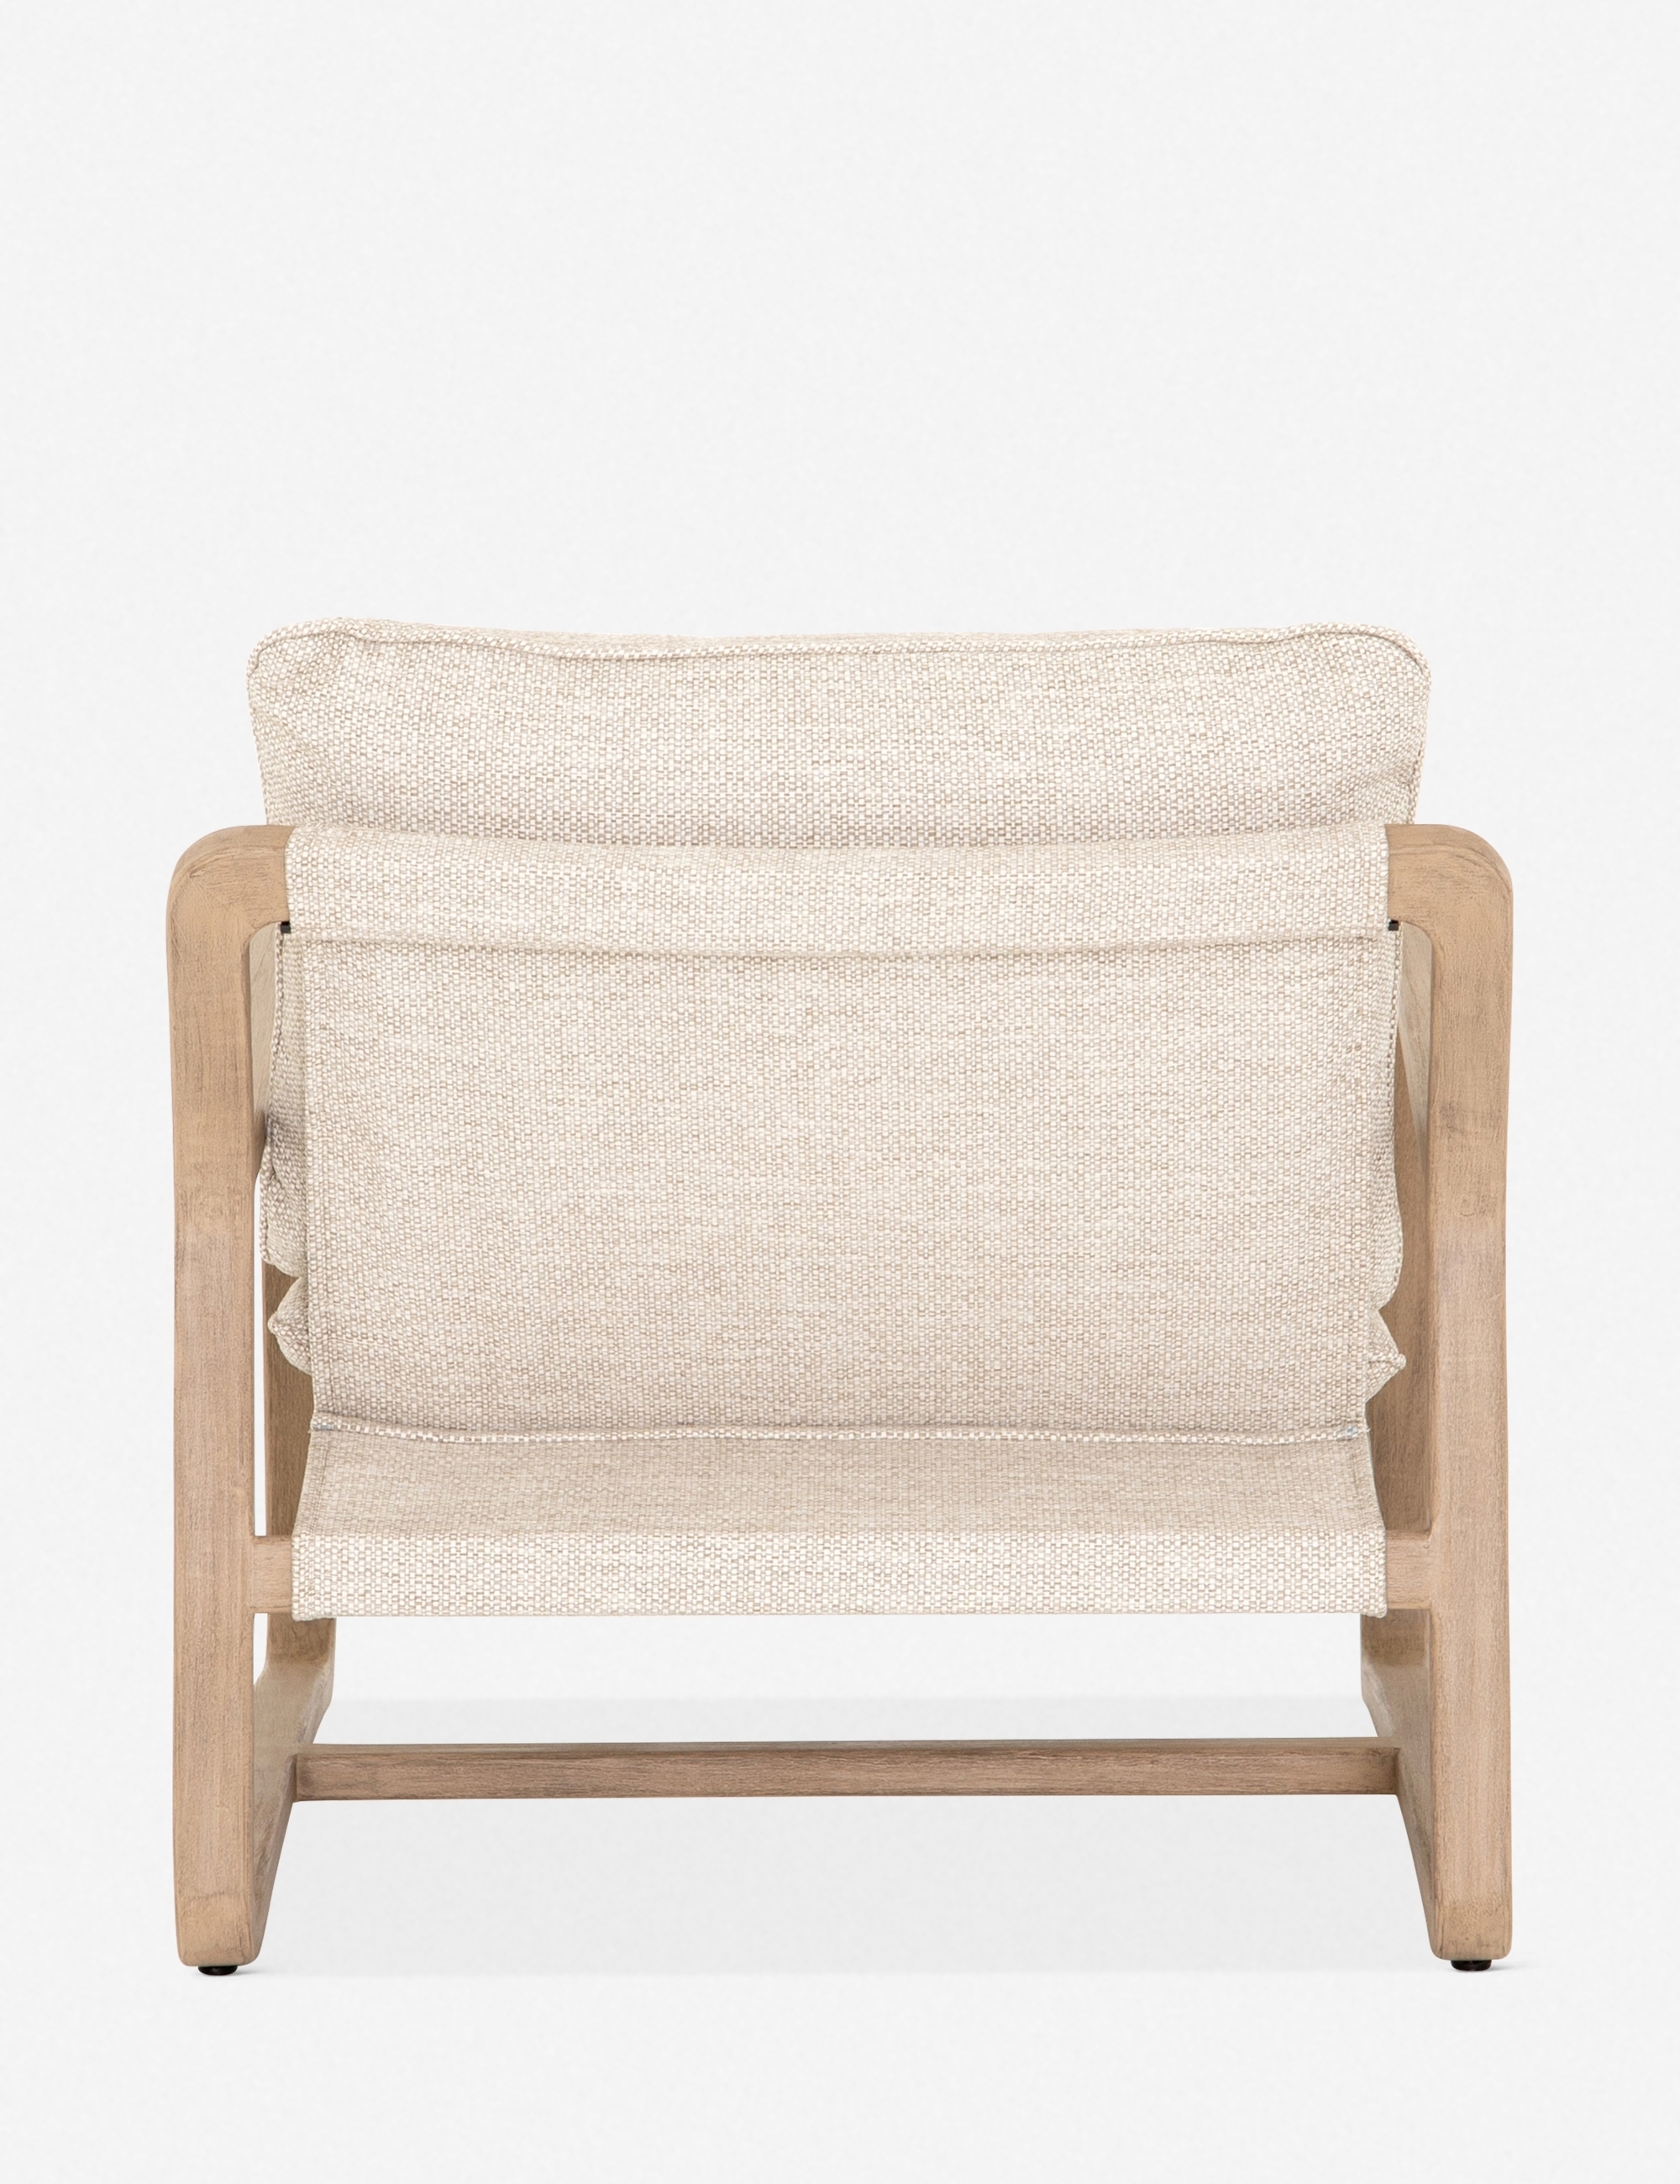 Nunelle Indoor / Outdoor Accent Chair - Image 3